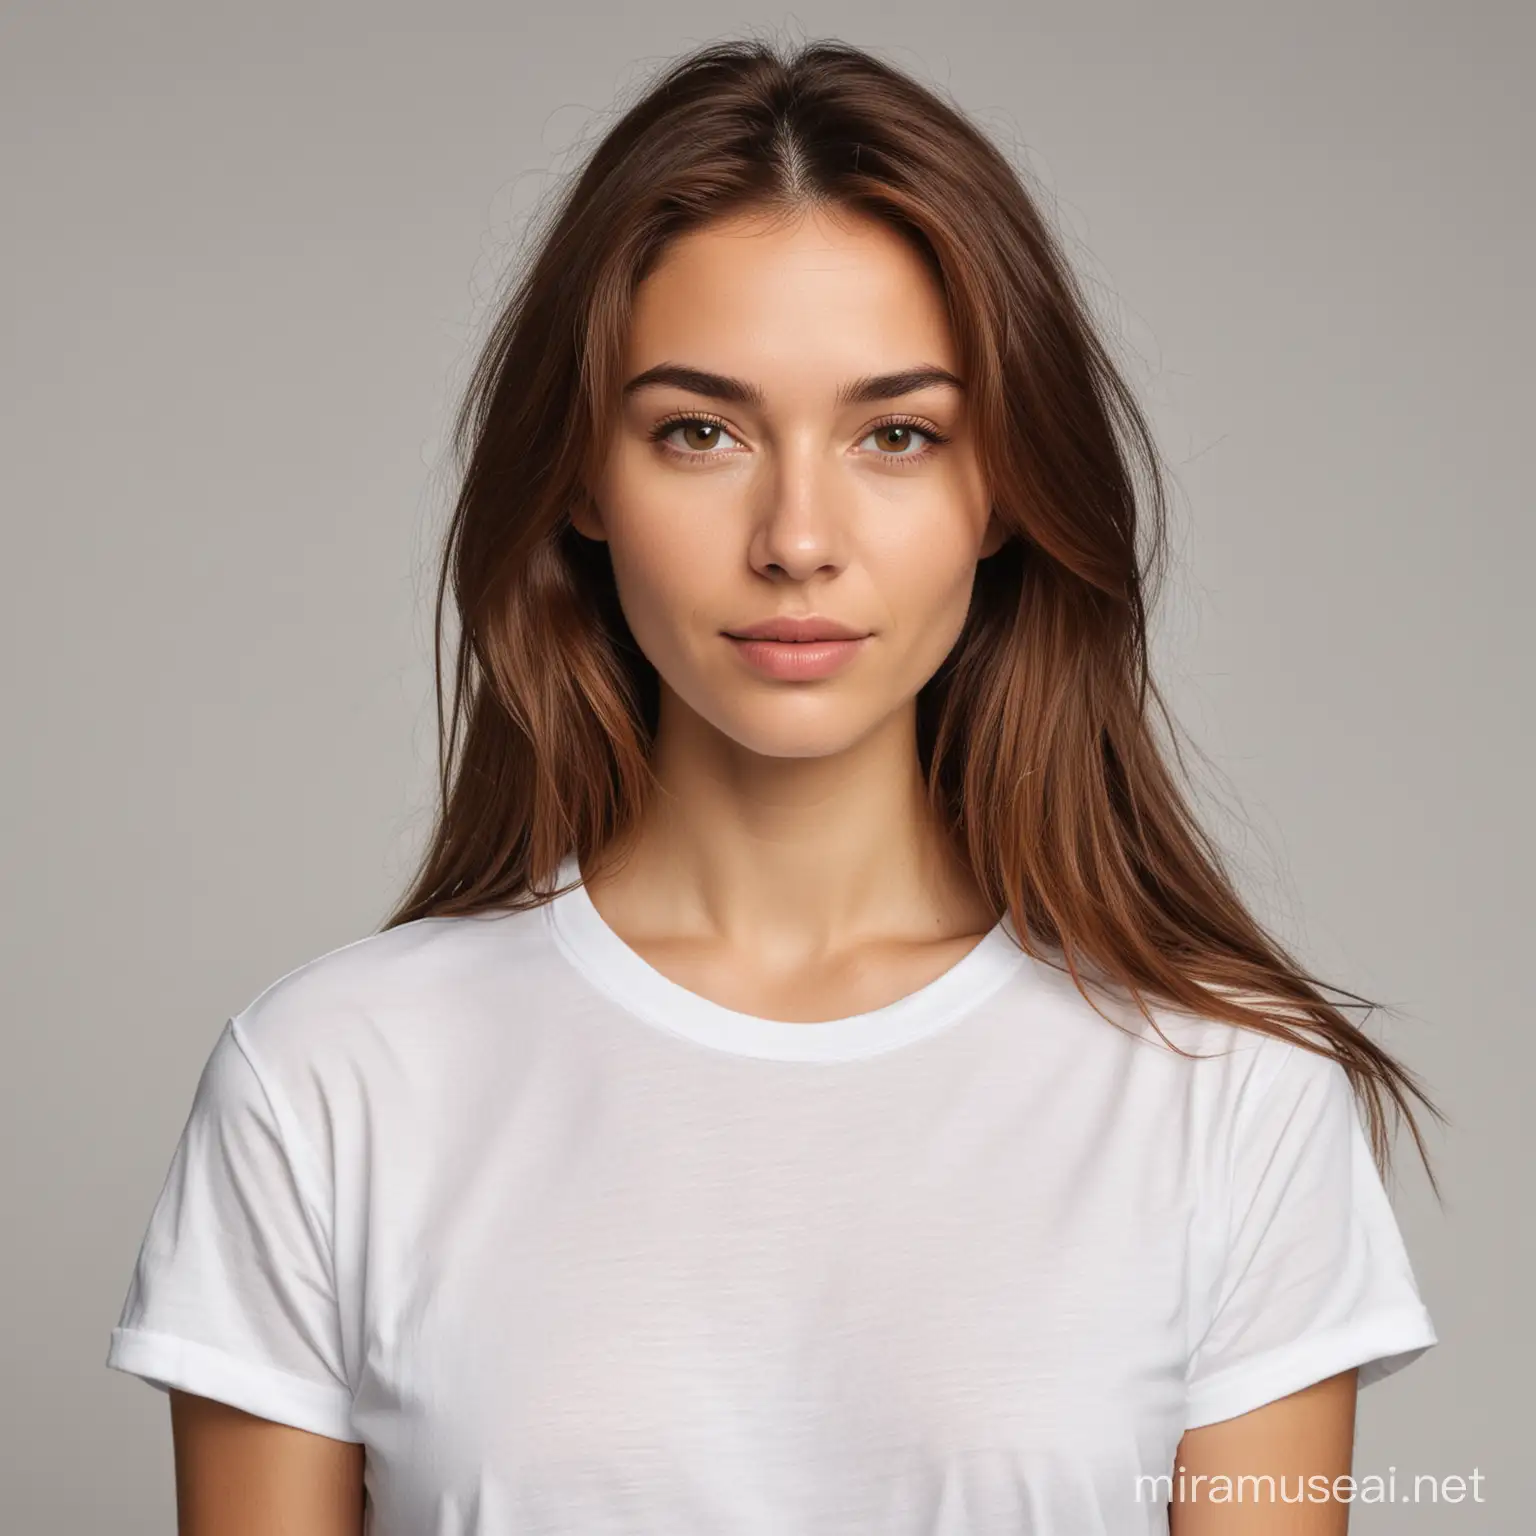 Stylish Woman in White Tee with Flowing Brown Hair